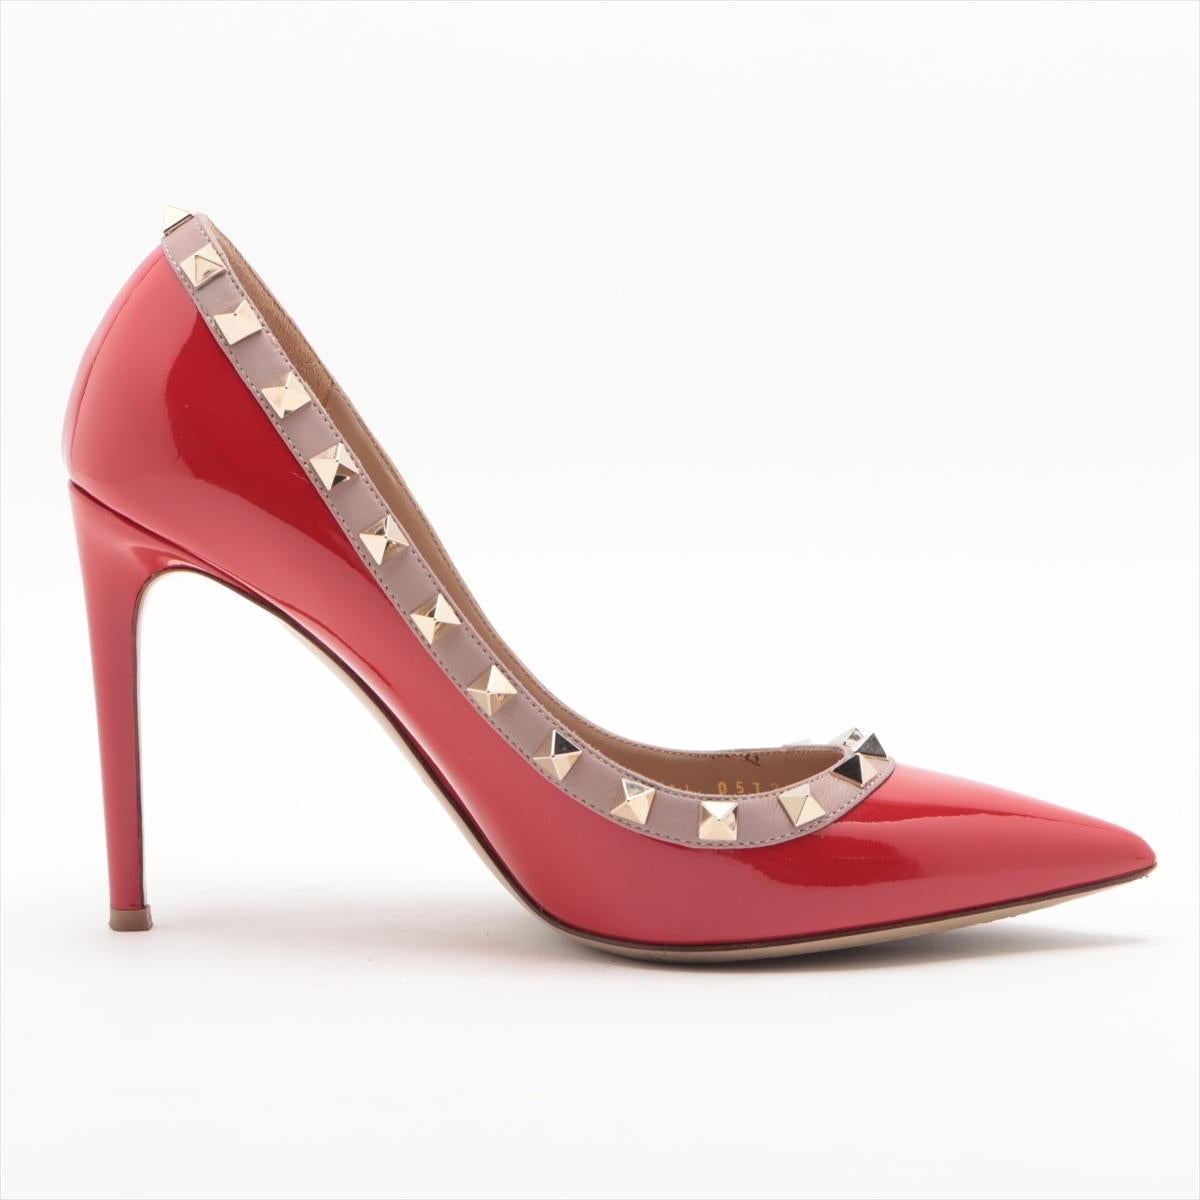 Valentino Garavani Rockstud Pointed-toe Patent Leather Pump Red For Sale 1